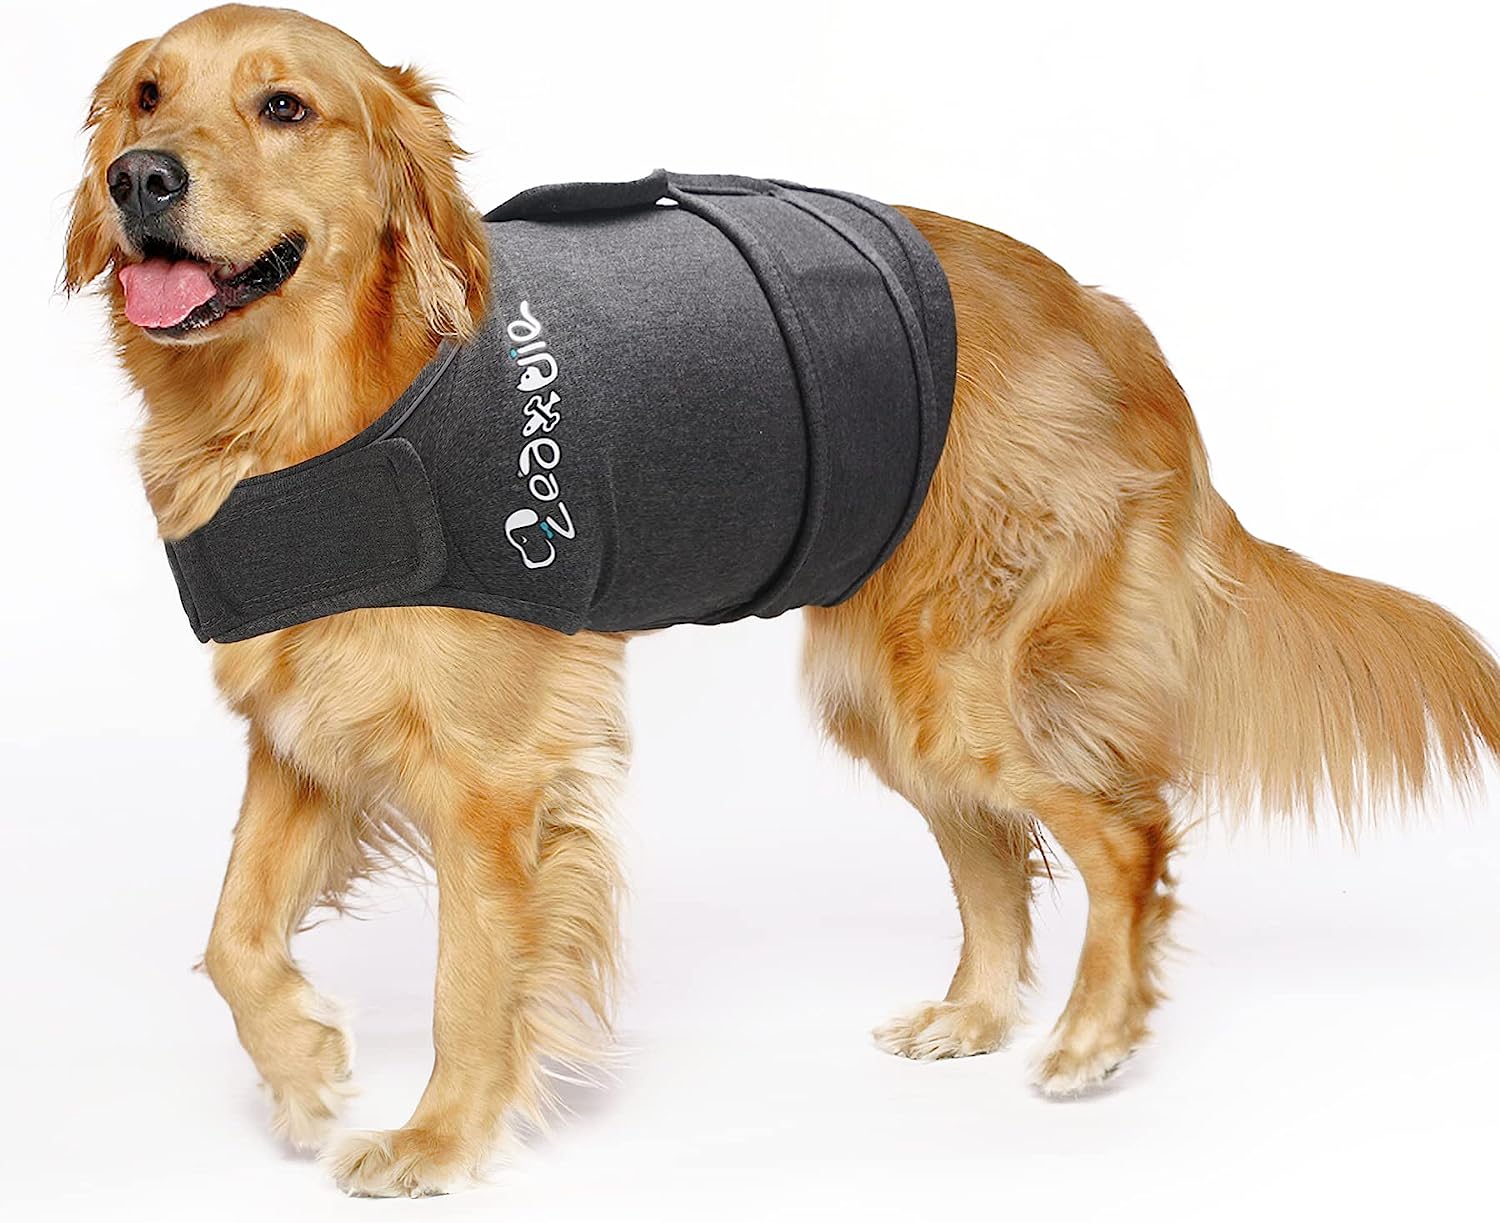 Zeaxuie Baby-Use-Grade Dog Anxiety Vest, Breathable Dog Jacket Wrap